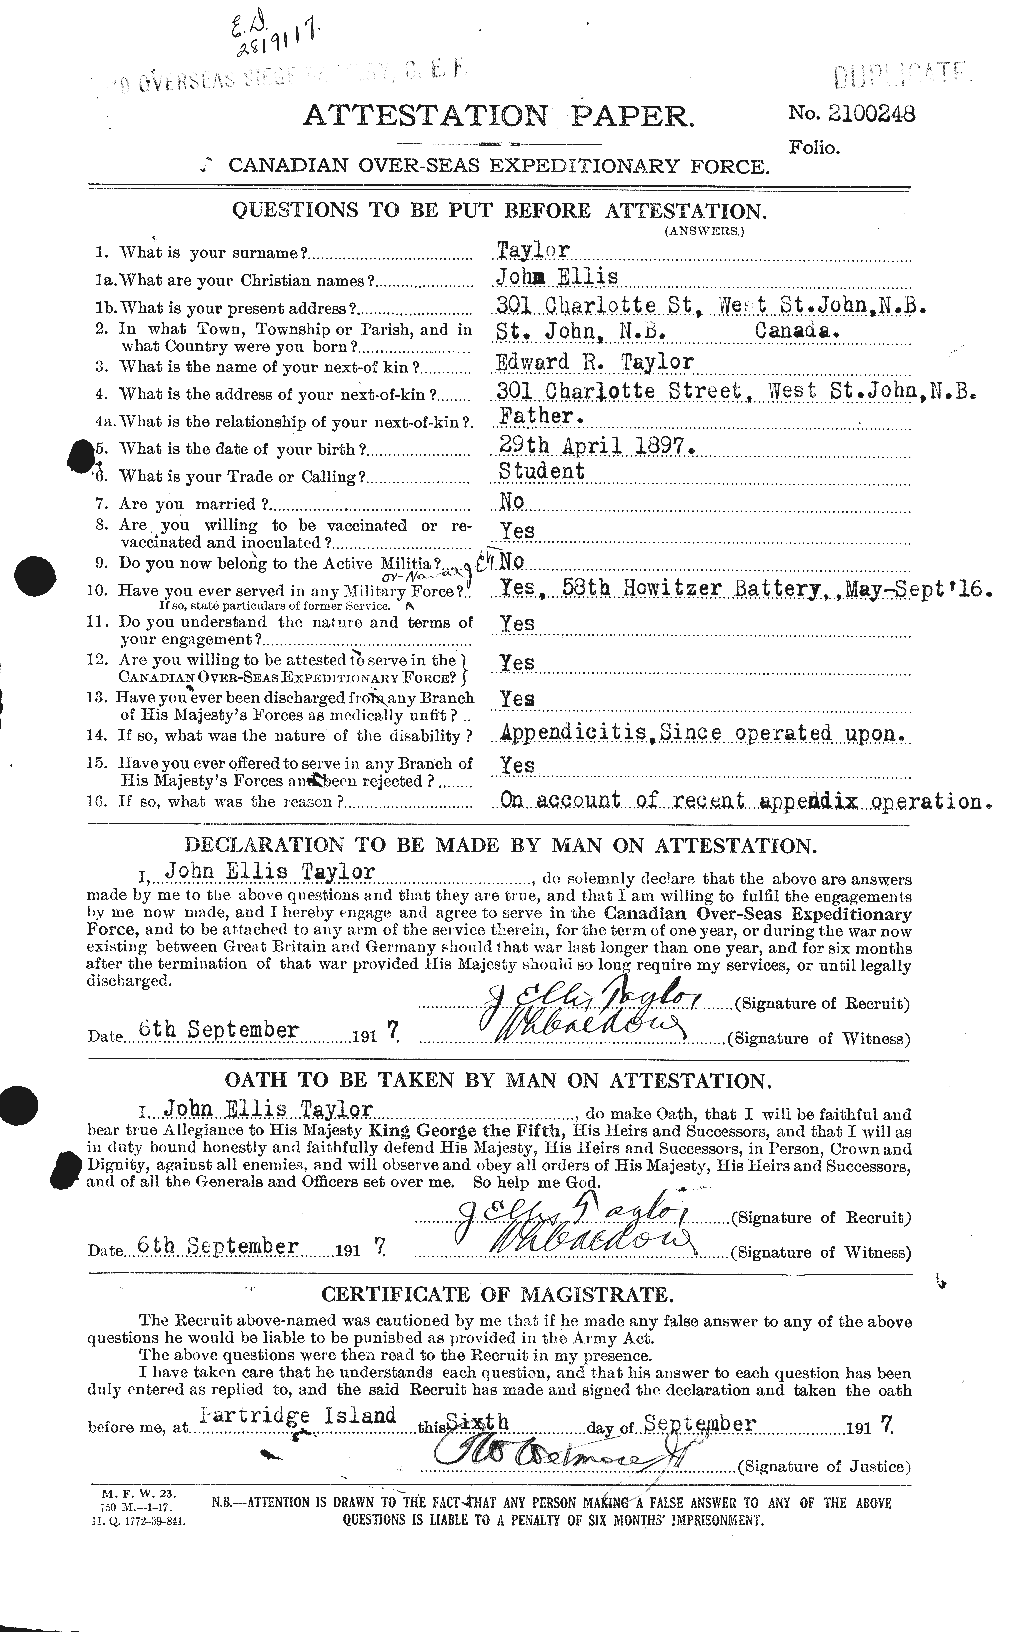 Personnel Records of the First World War - CEF 627085a